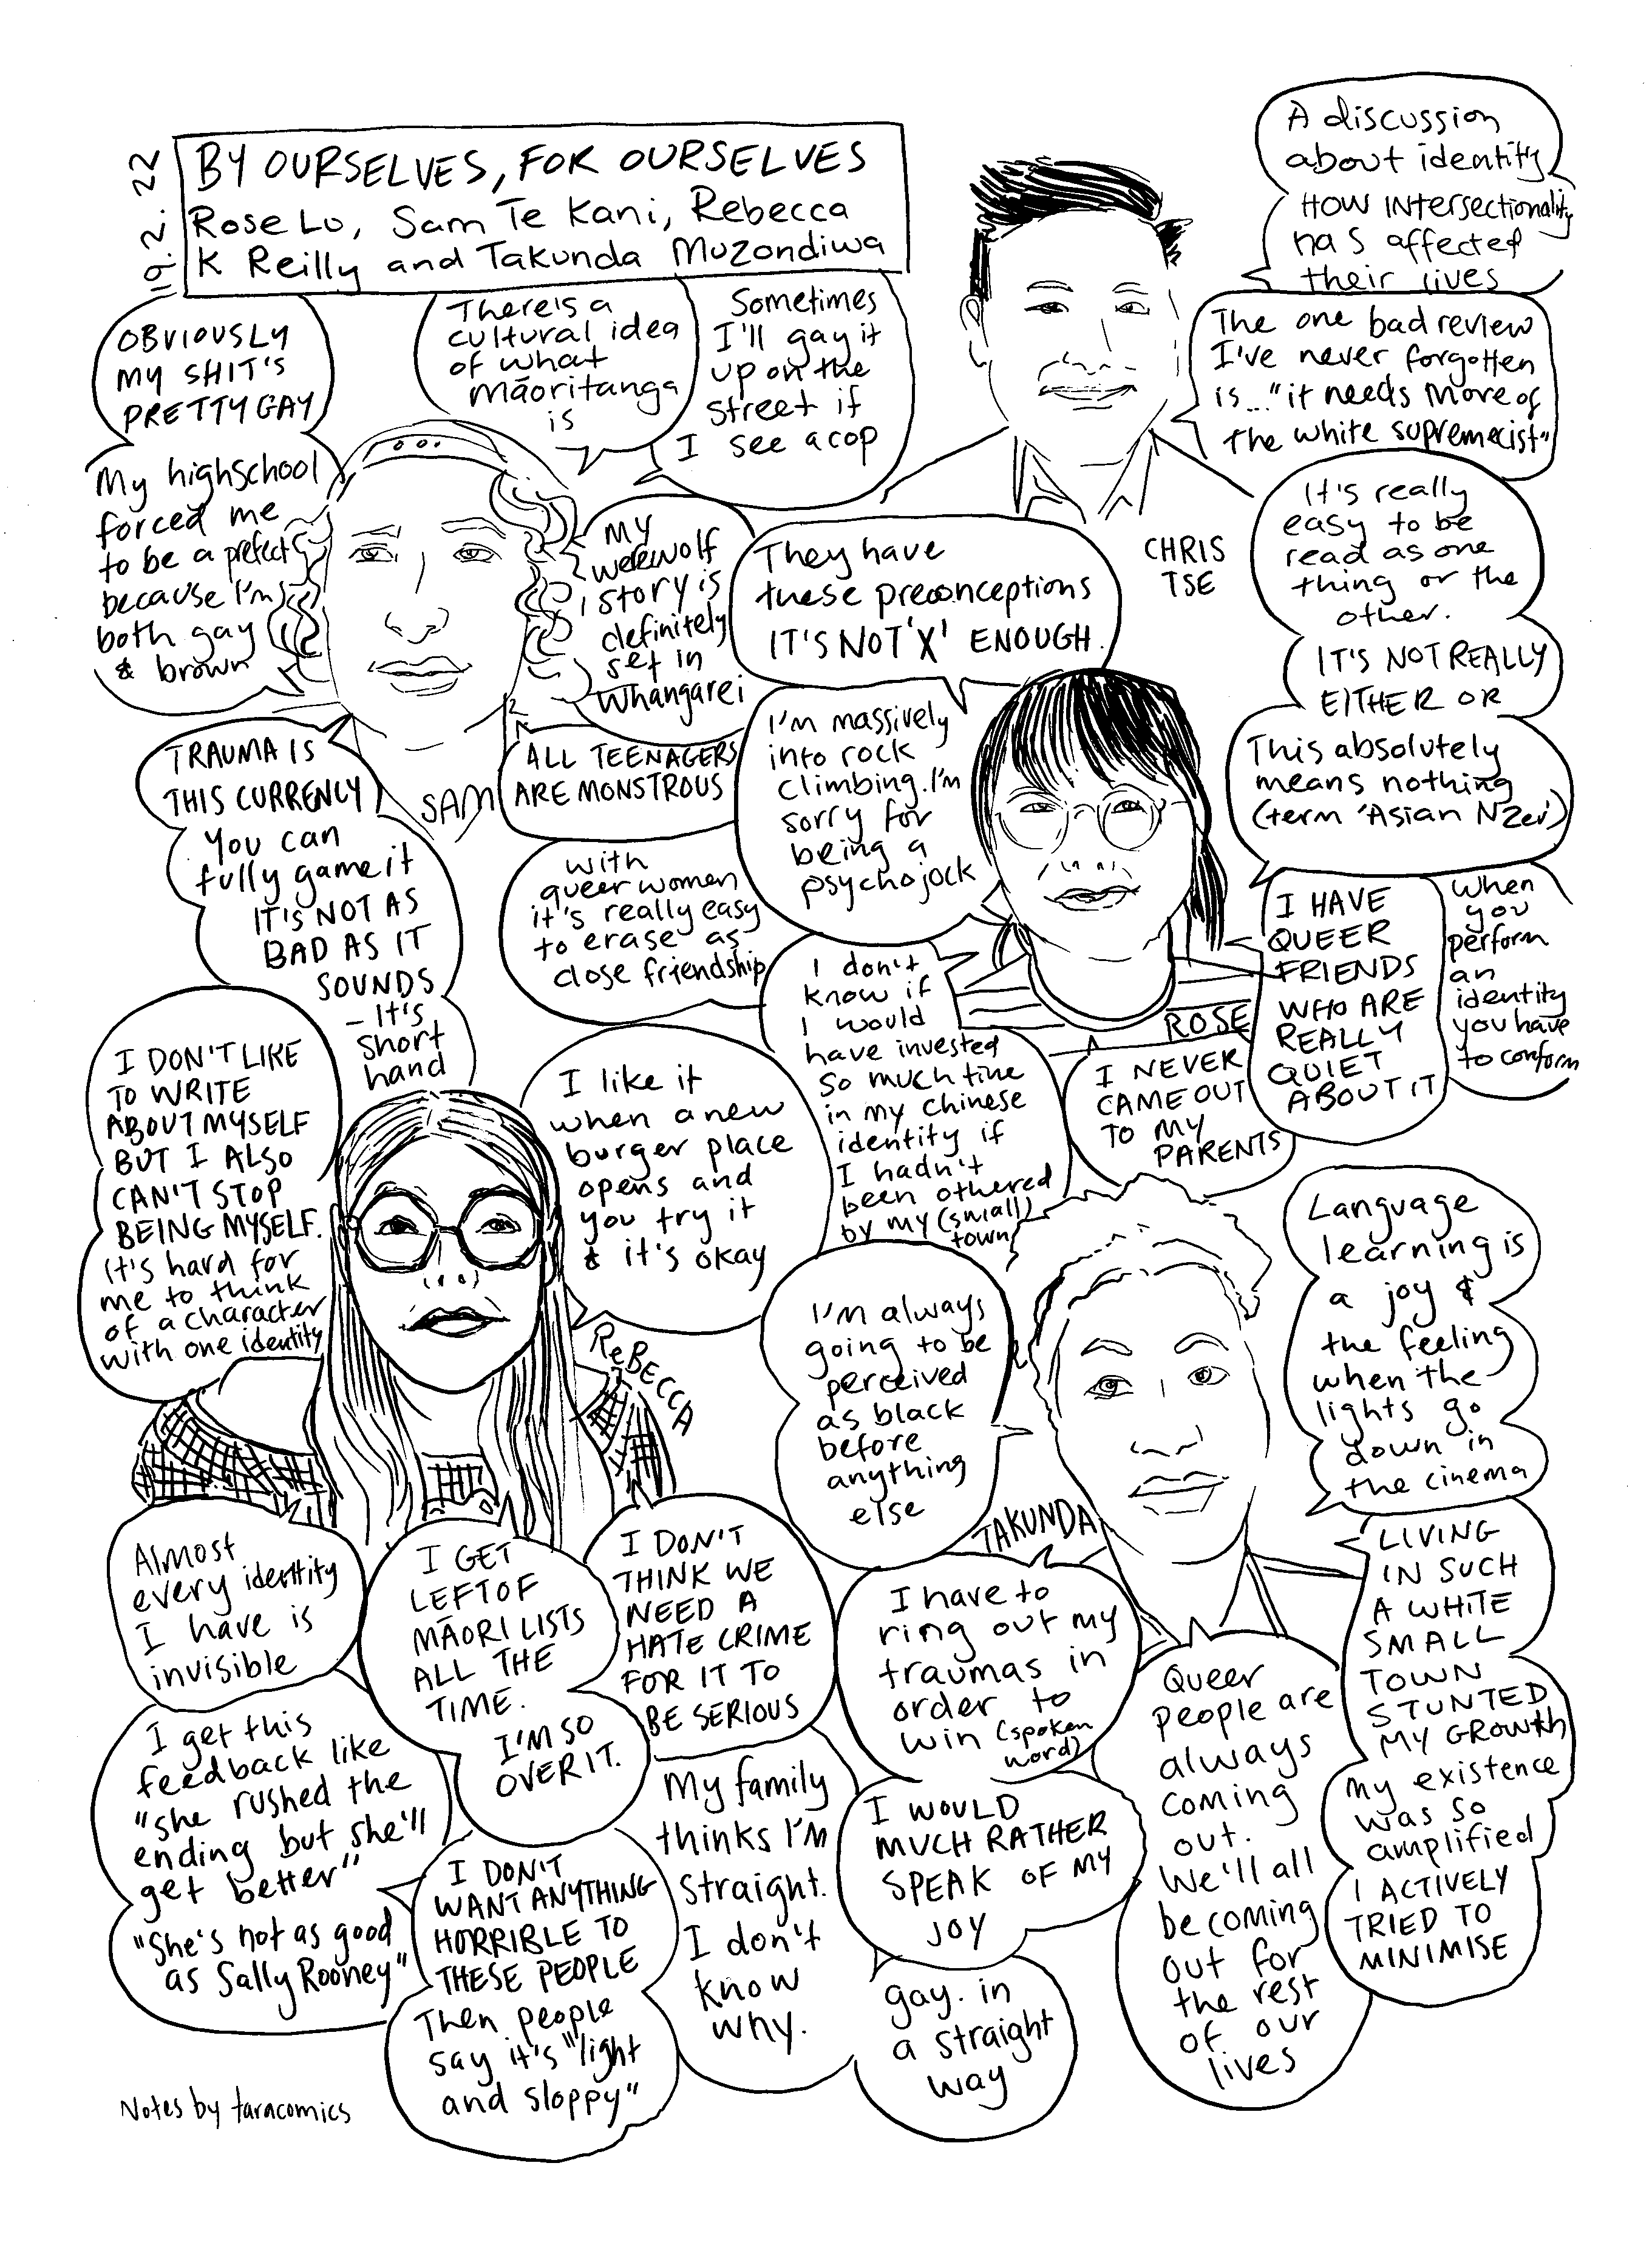 Cartoon heads with quotes from the talk